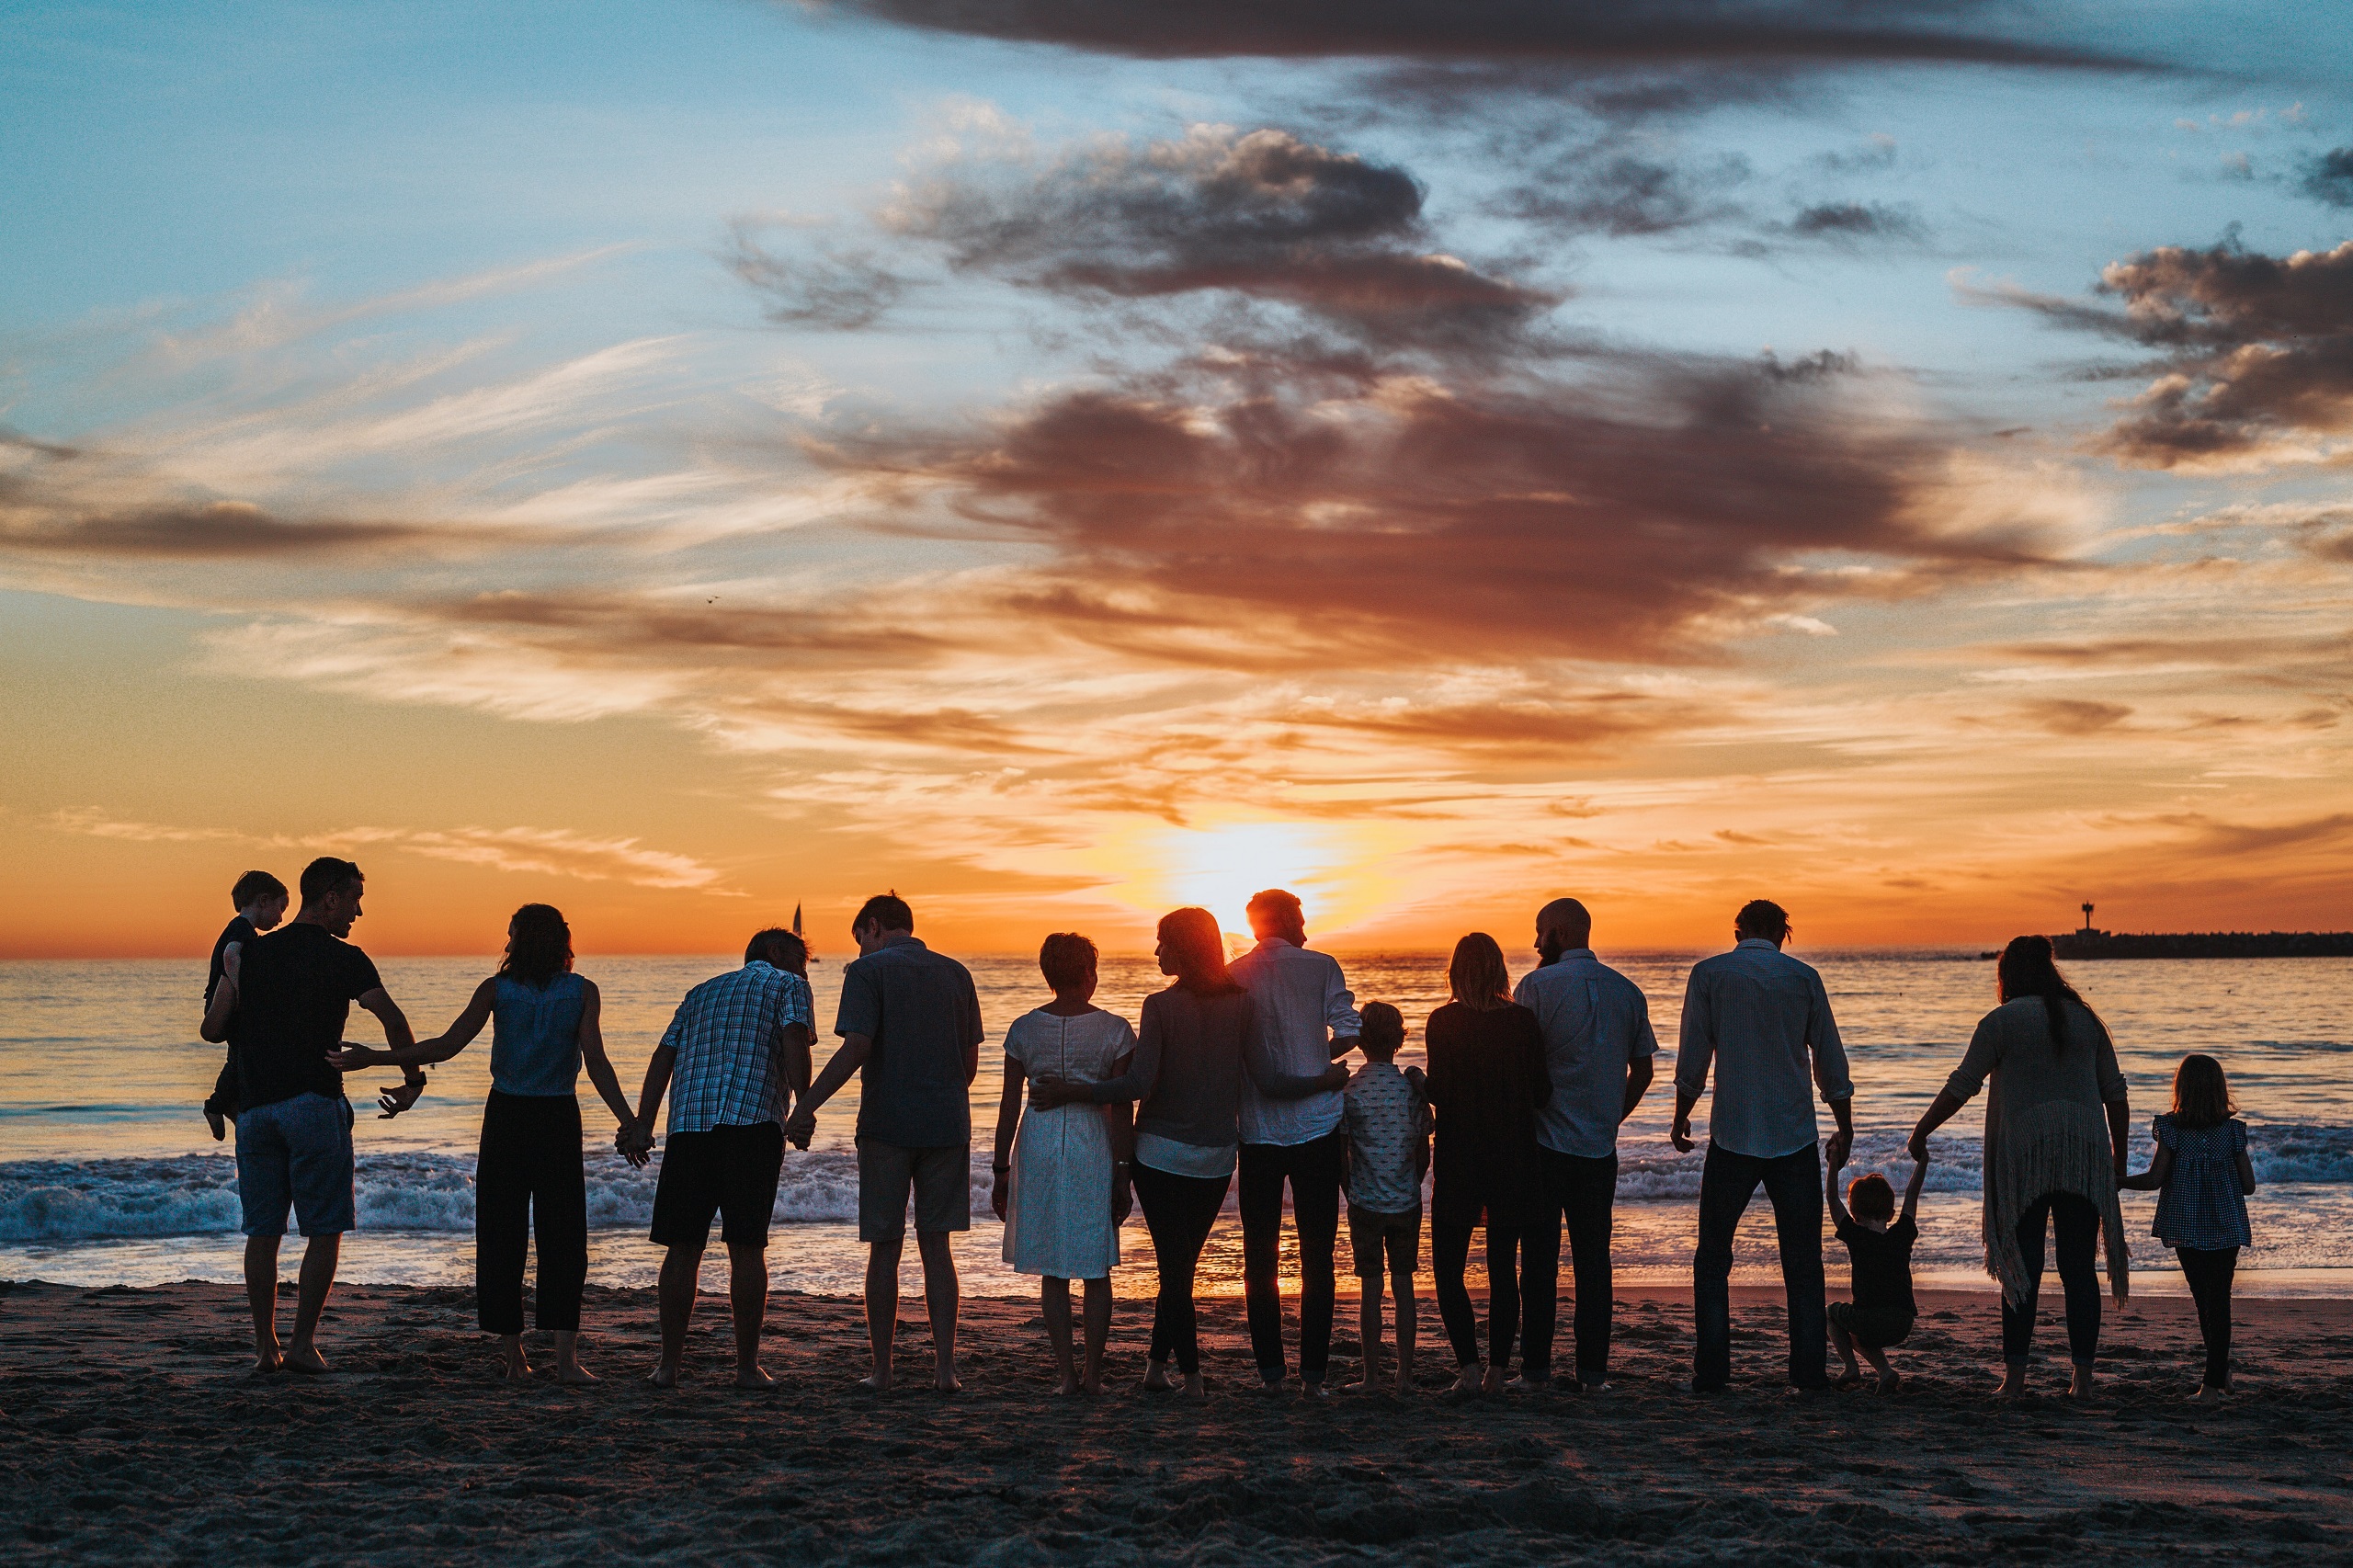 A large group of people of all ages stand on a beach facing the ocean at sunset